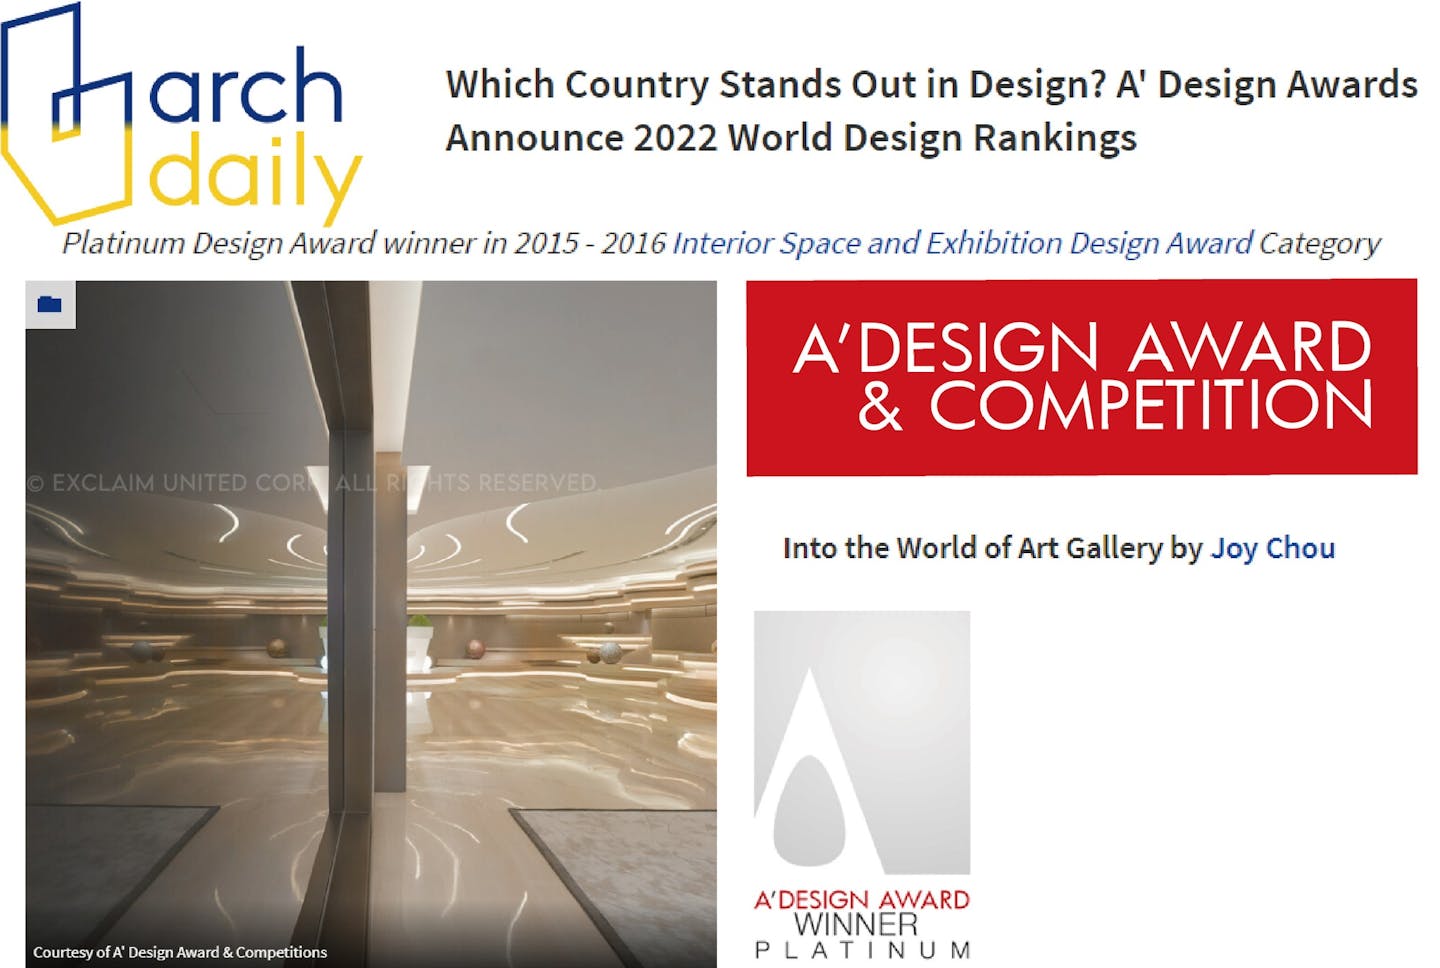 ArchDaily | Which Country Stands Out in Design? A' Design Awards Announce 2022 World Design Rankings